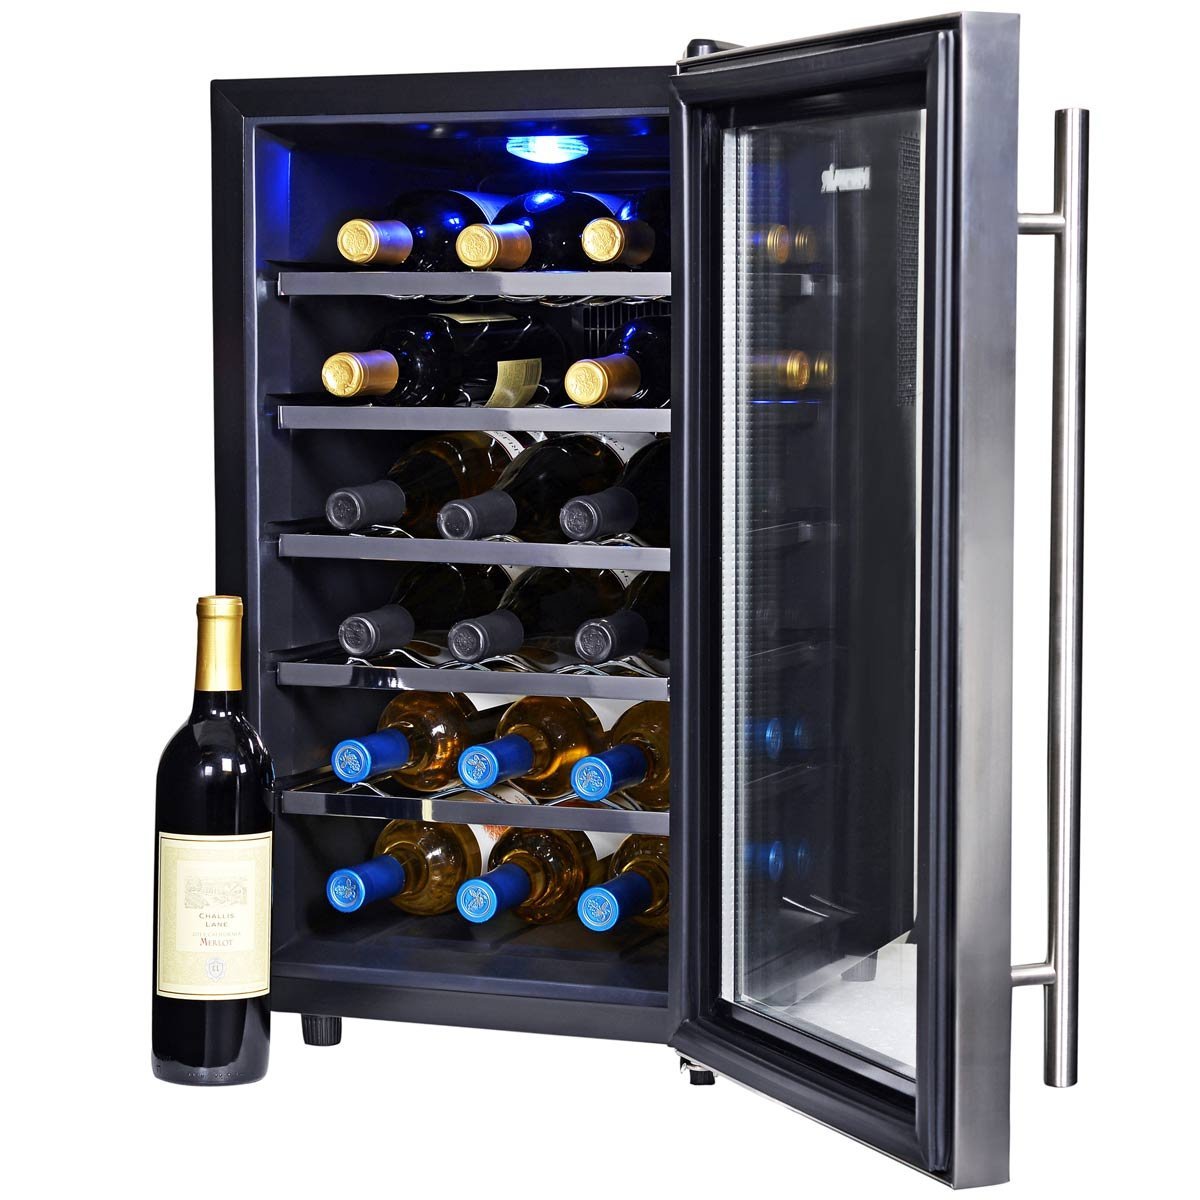 NewAir-AW-181E-Thermoelectric-Wine-Cooler